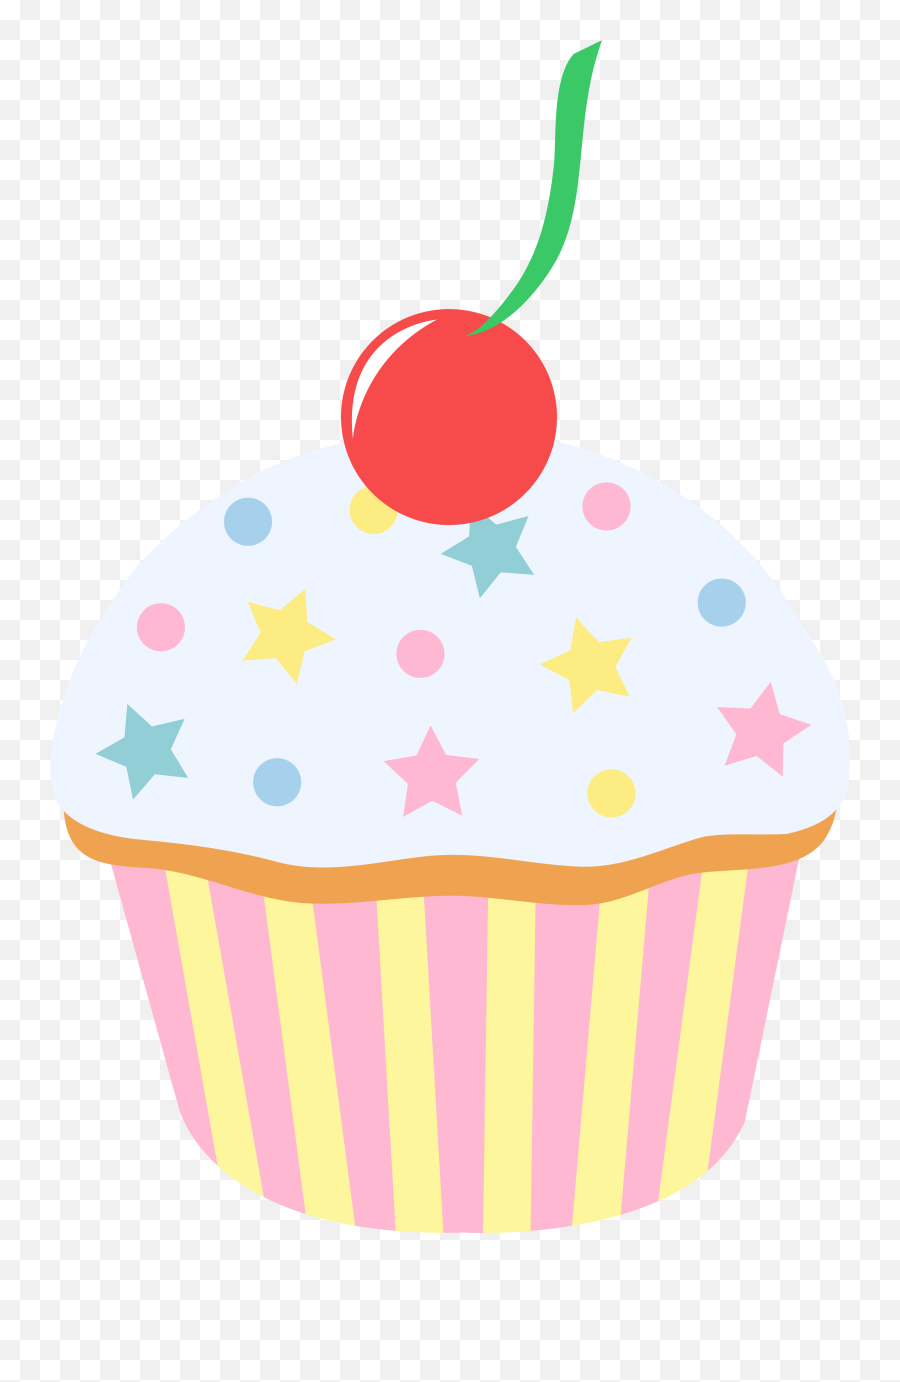 Cupcake Clip Art Free Free Clipart Images 2 - Clipartix Cartoon Cupcake Clipart Png Emoji,Cupcake Emoji Facebook